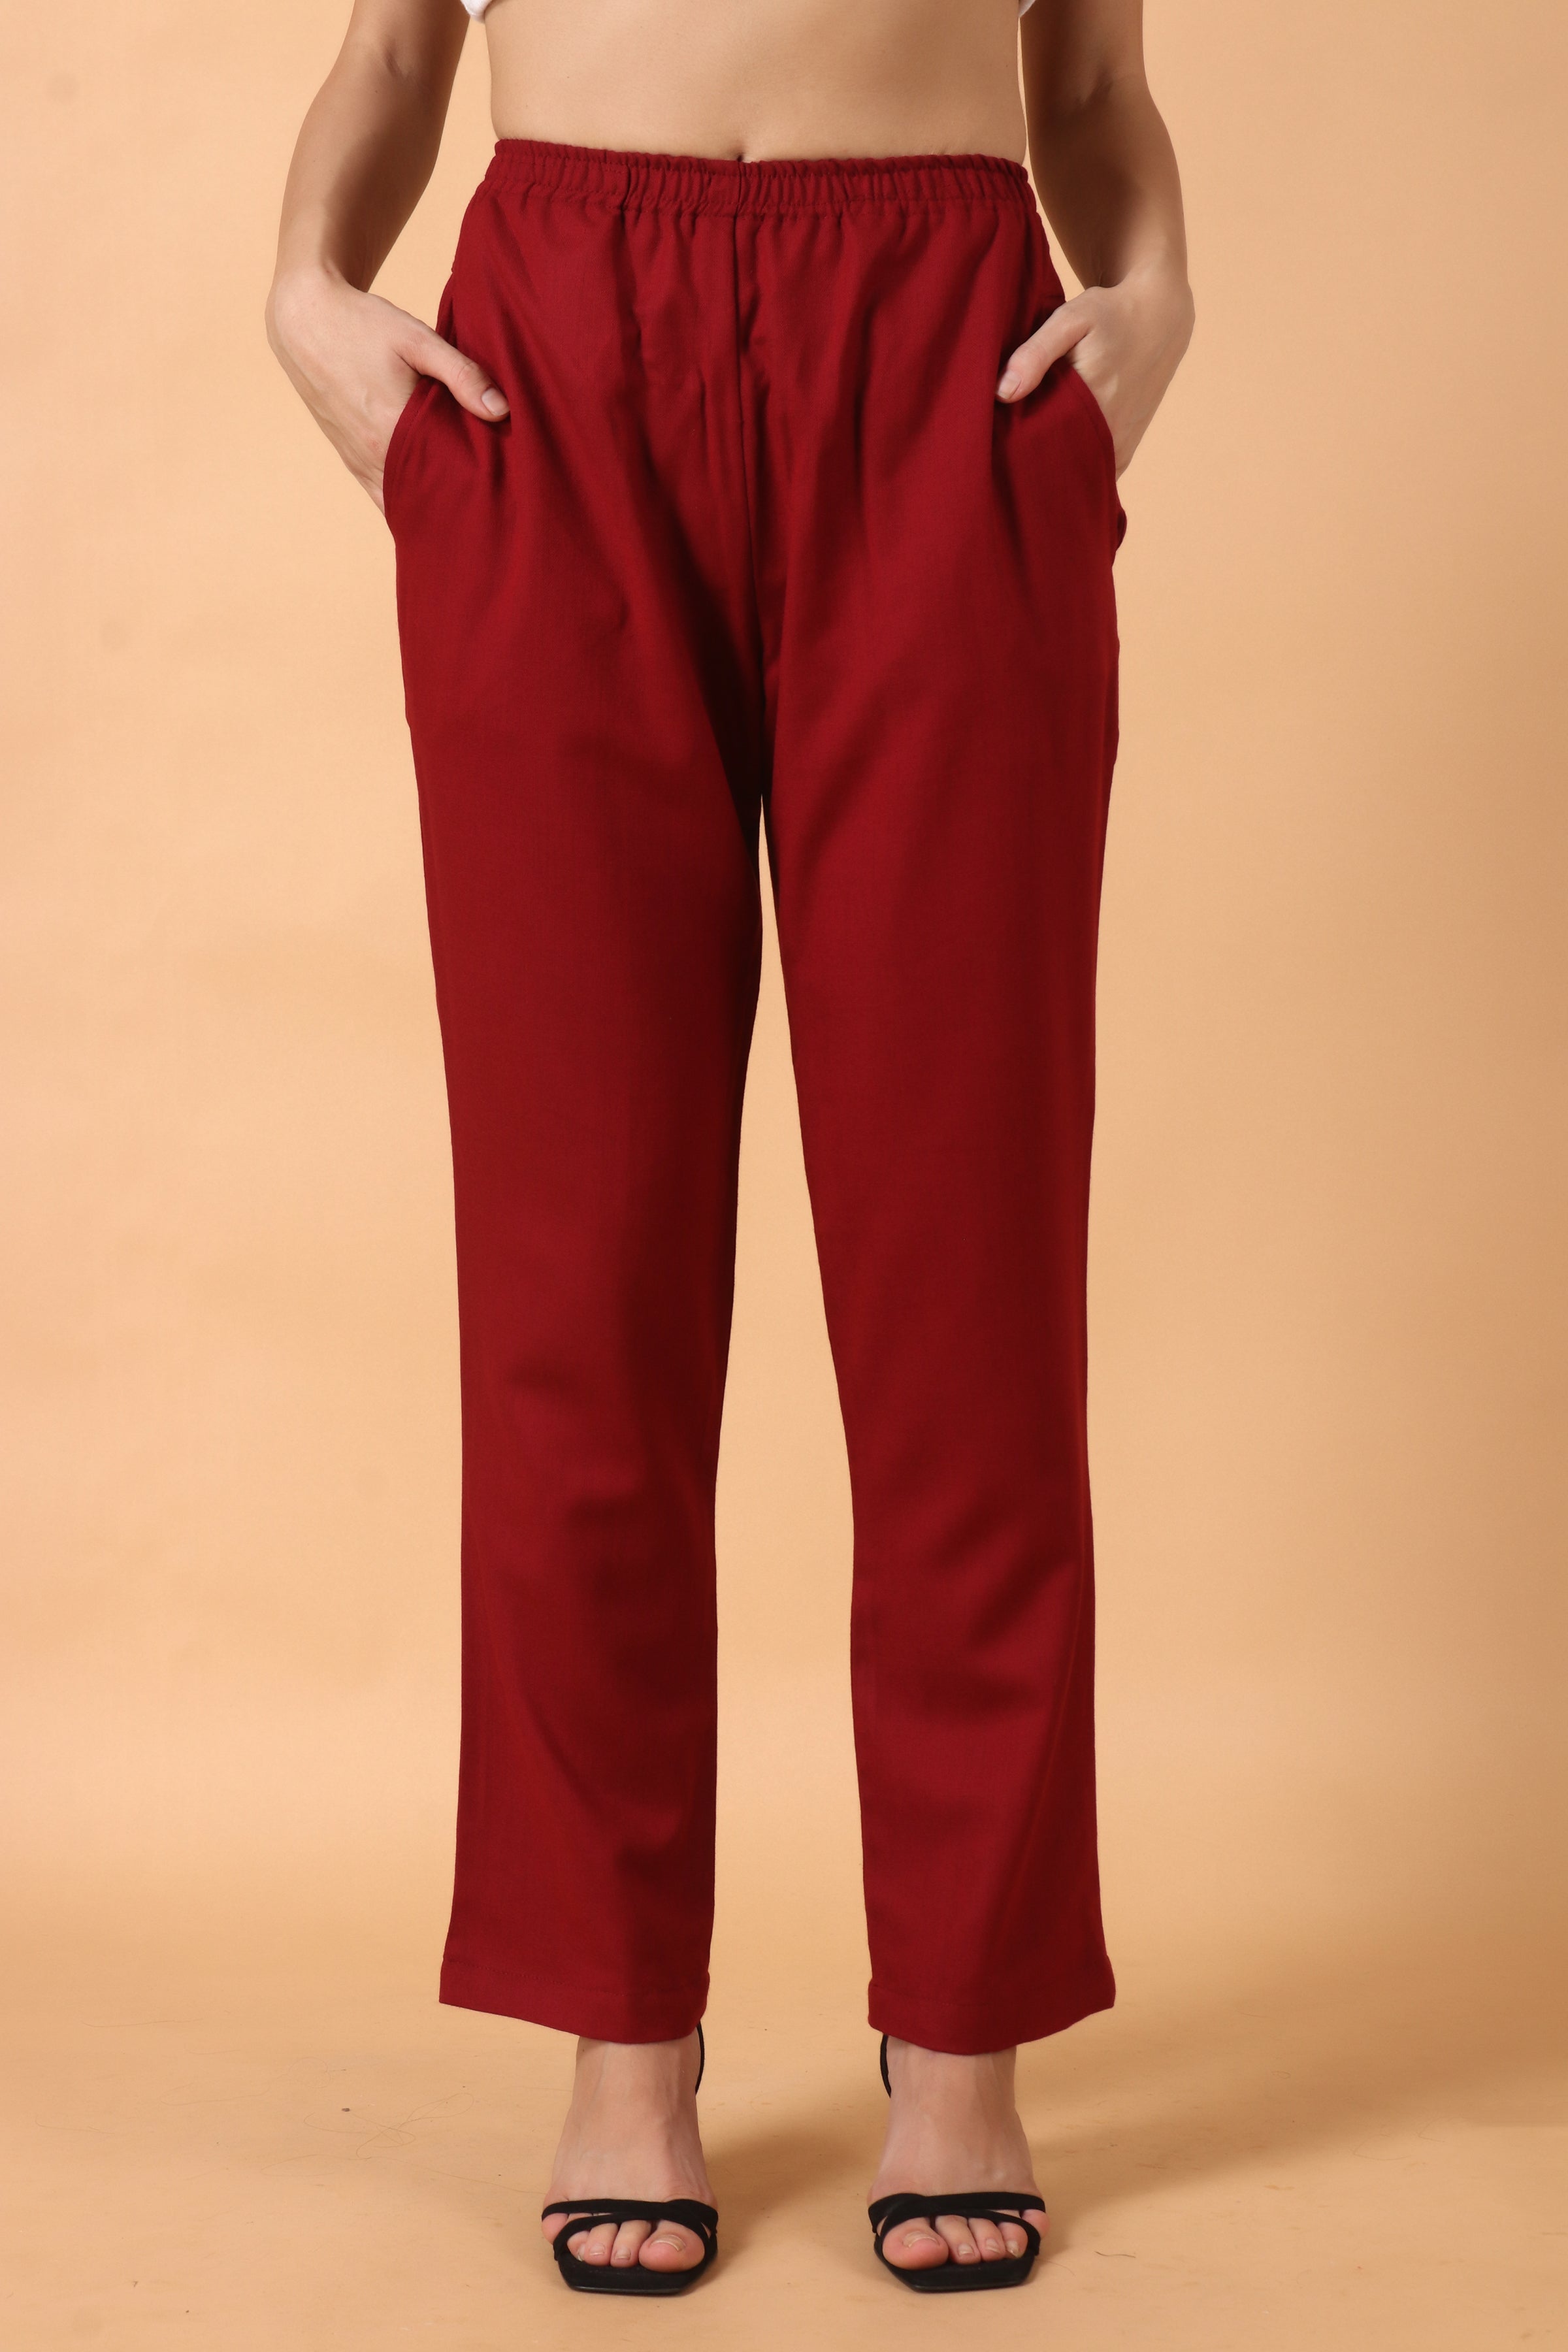 Buy Light Gold Parallel Pants Online - W for Woman